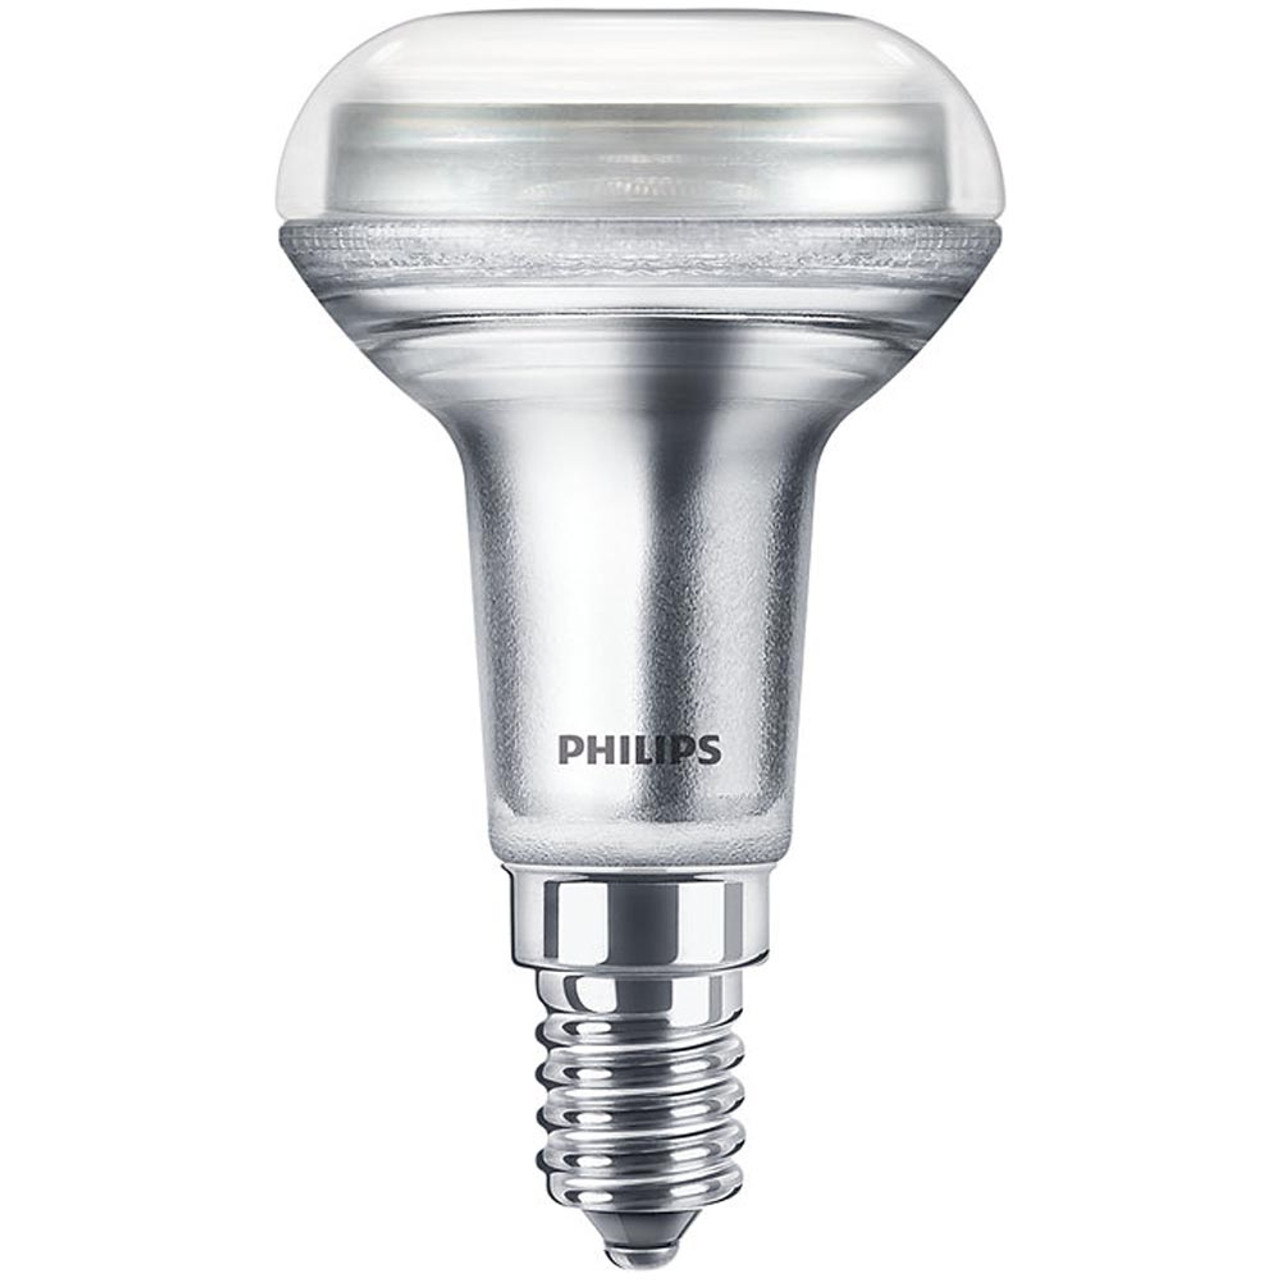 Philips LED R50 4.3W Very Warm White SES 36 Degrees Dimmable